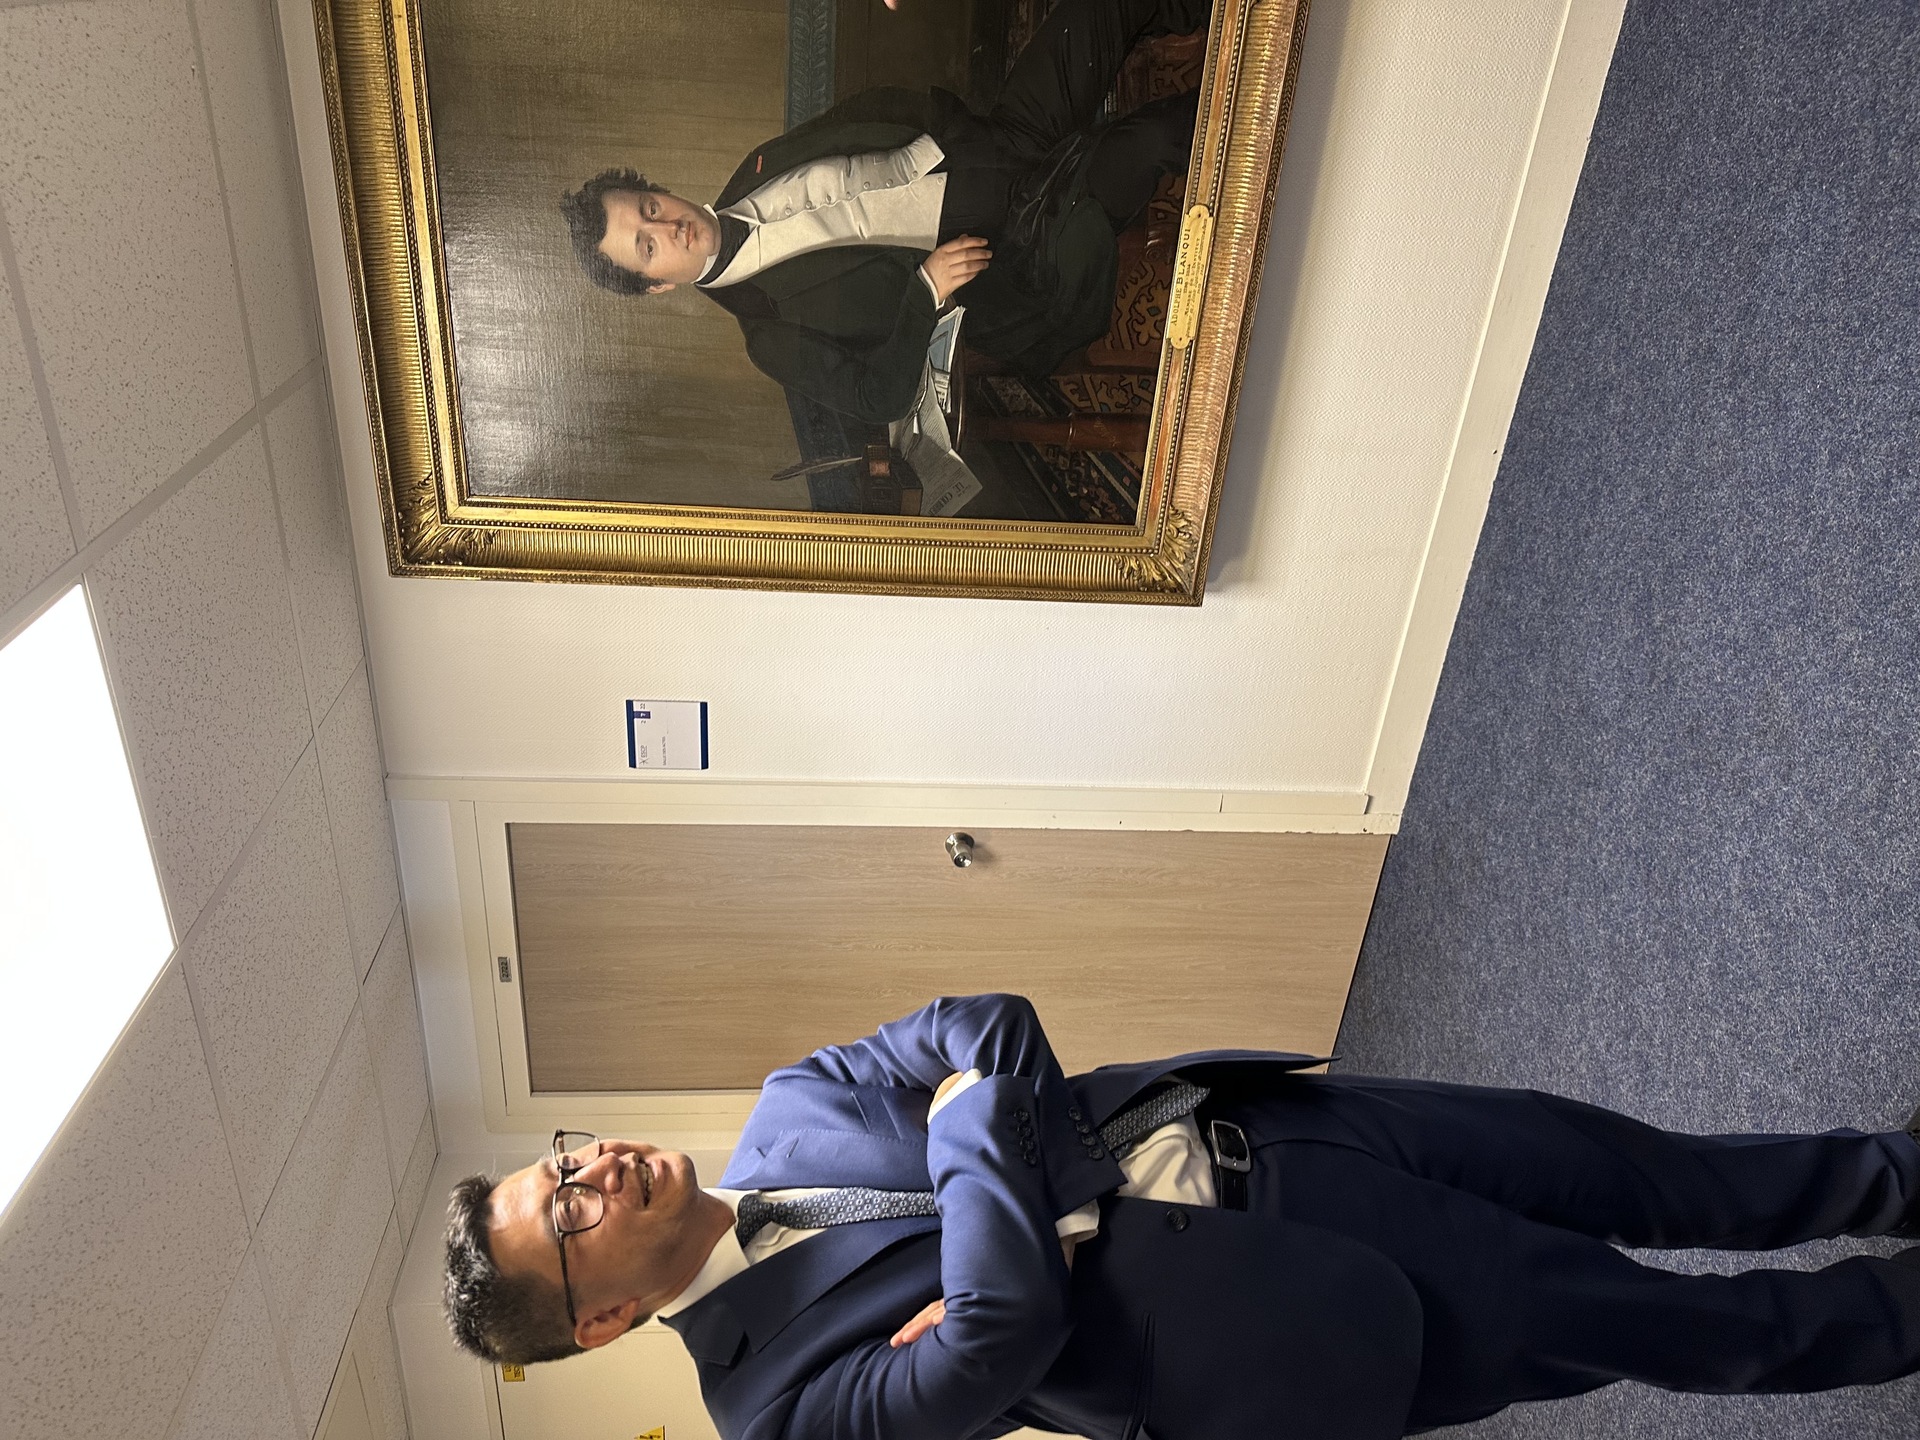 ESCP’s Executive President and Dean Léon Laulusa with a portrait of ESCP’s third president, Adolphe Blanqui, a French economist.